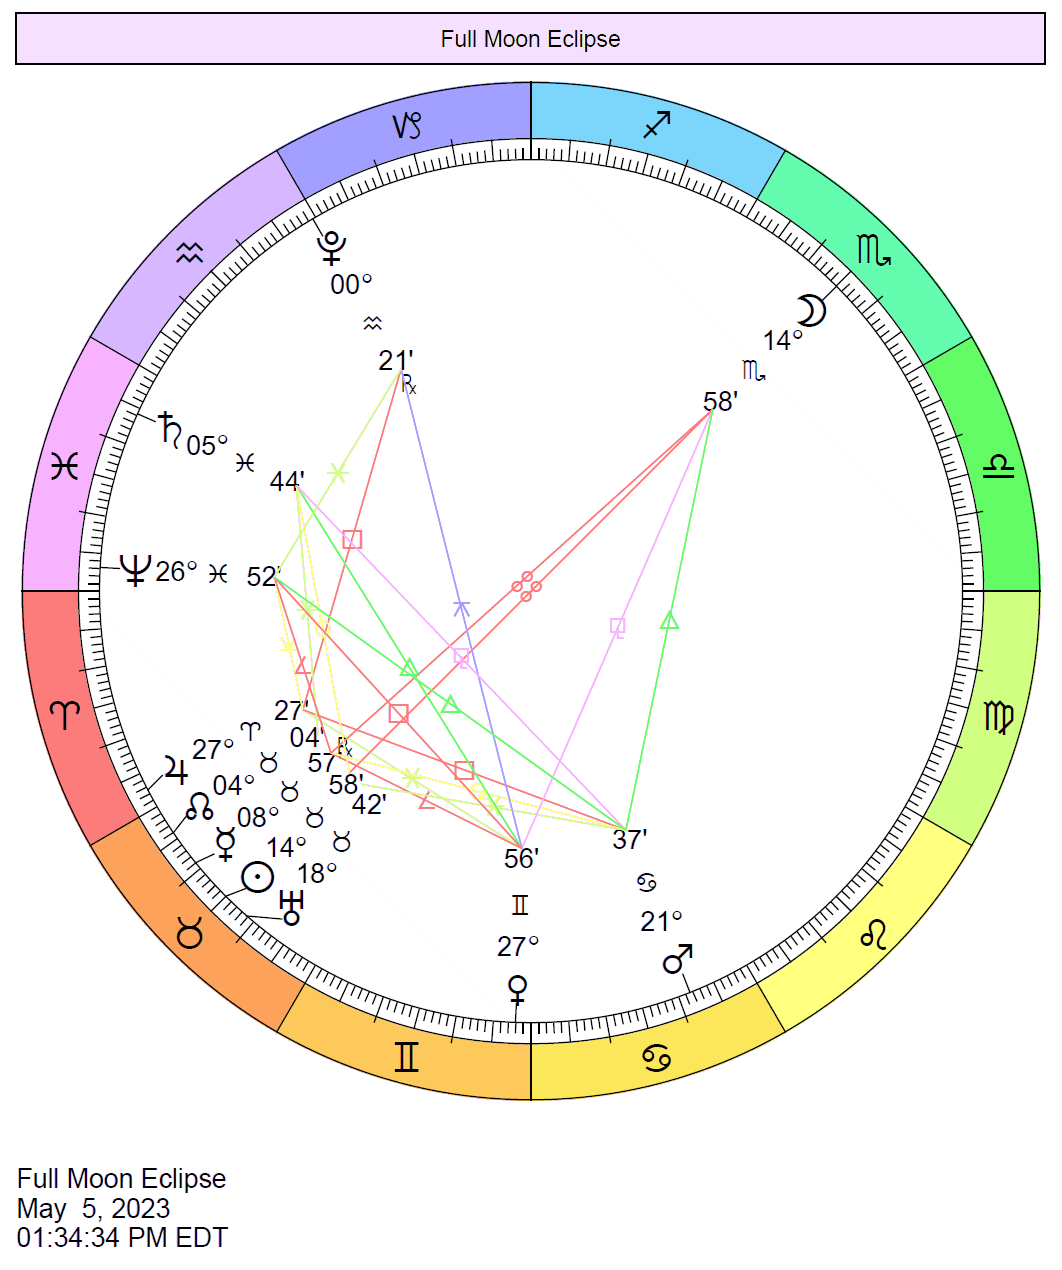 Chart wheel showing the planetary positions at the time of the Lunar Eclipse, with the Sun in Taurus opposing the Moon in Scorpio